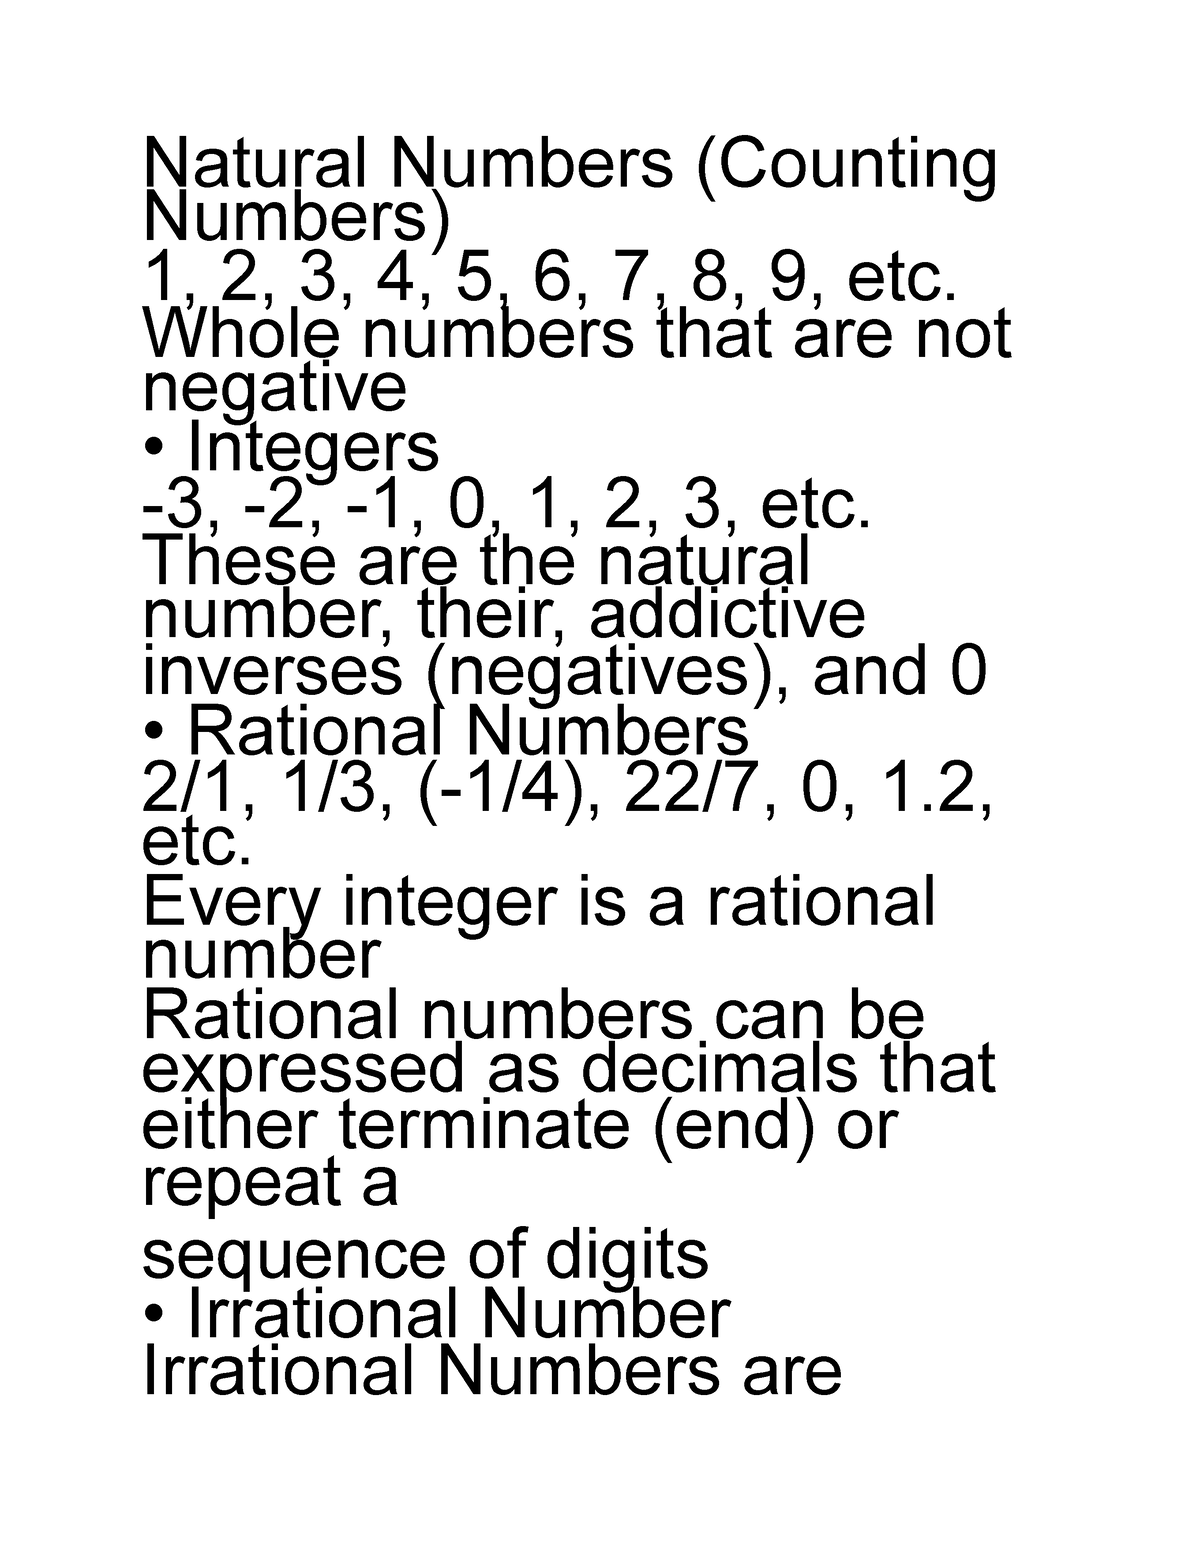 natural-numbers-counting-numbers-natural-numbers-counting-numbers